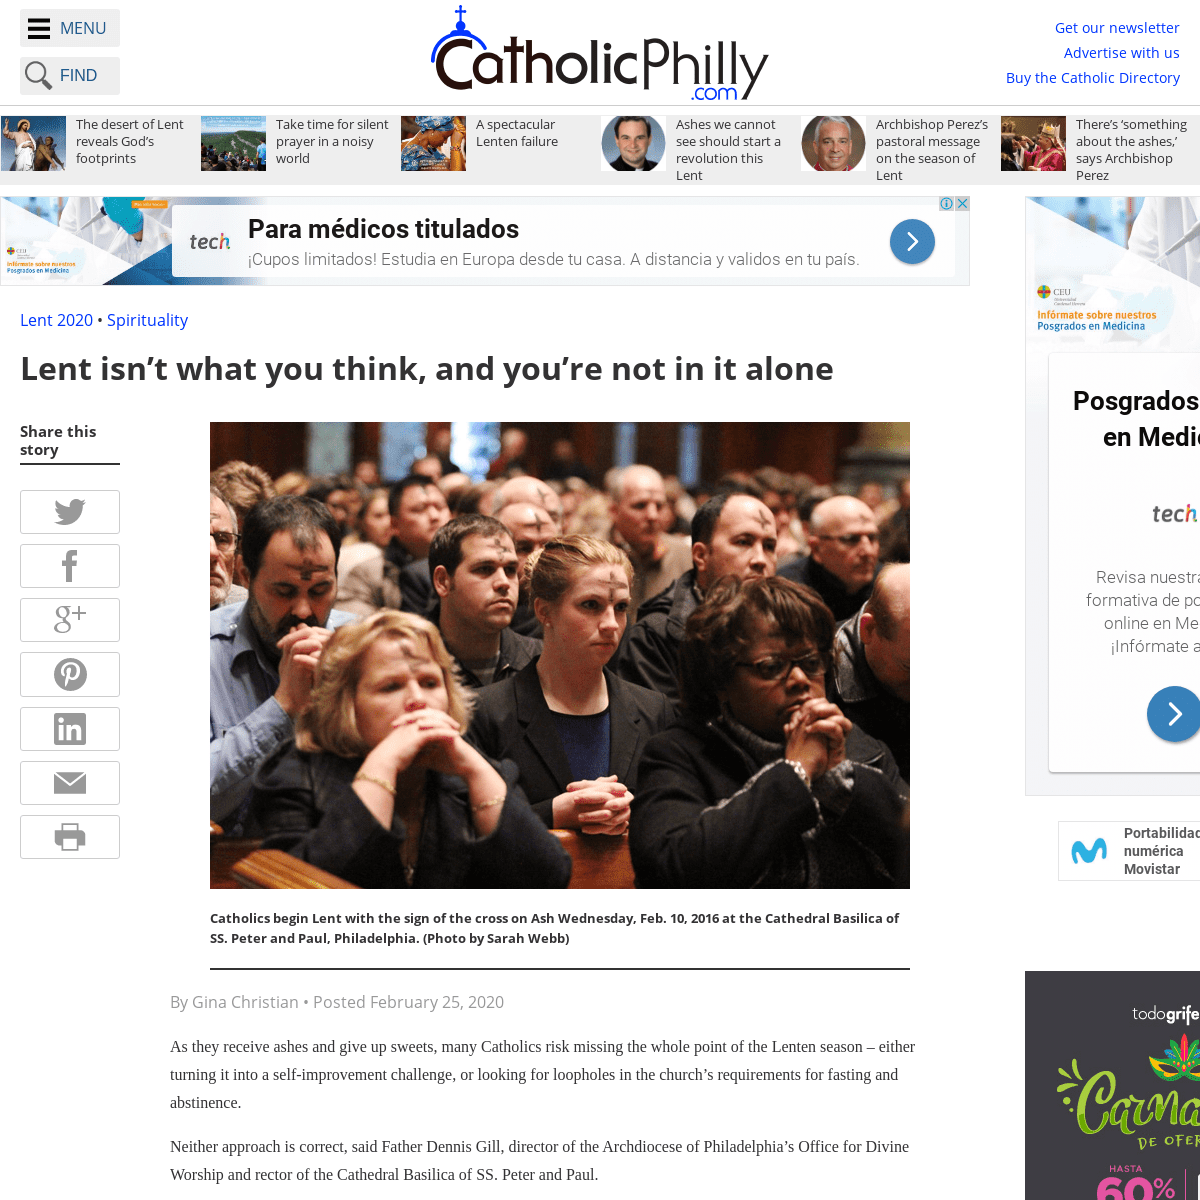 A complete backup of catholicphilly.com/2020/02/catholic-spirituality/lent-isnt-what-you-think-and-youre-not-in-it-alone/